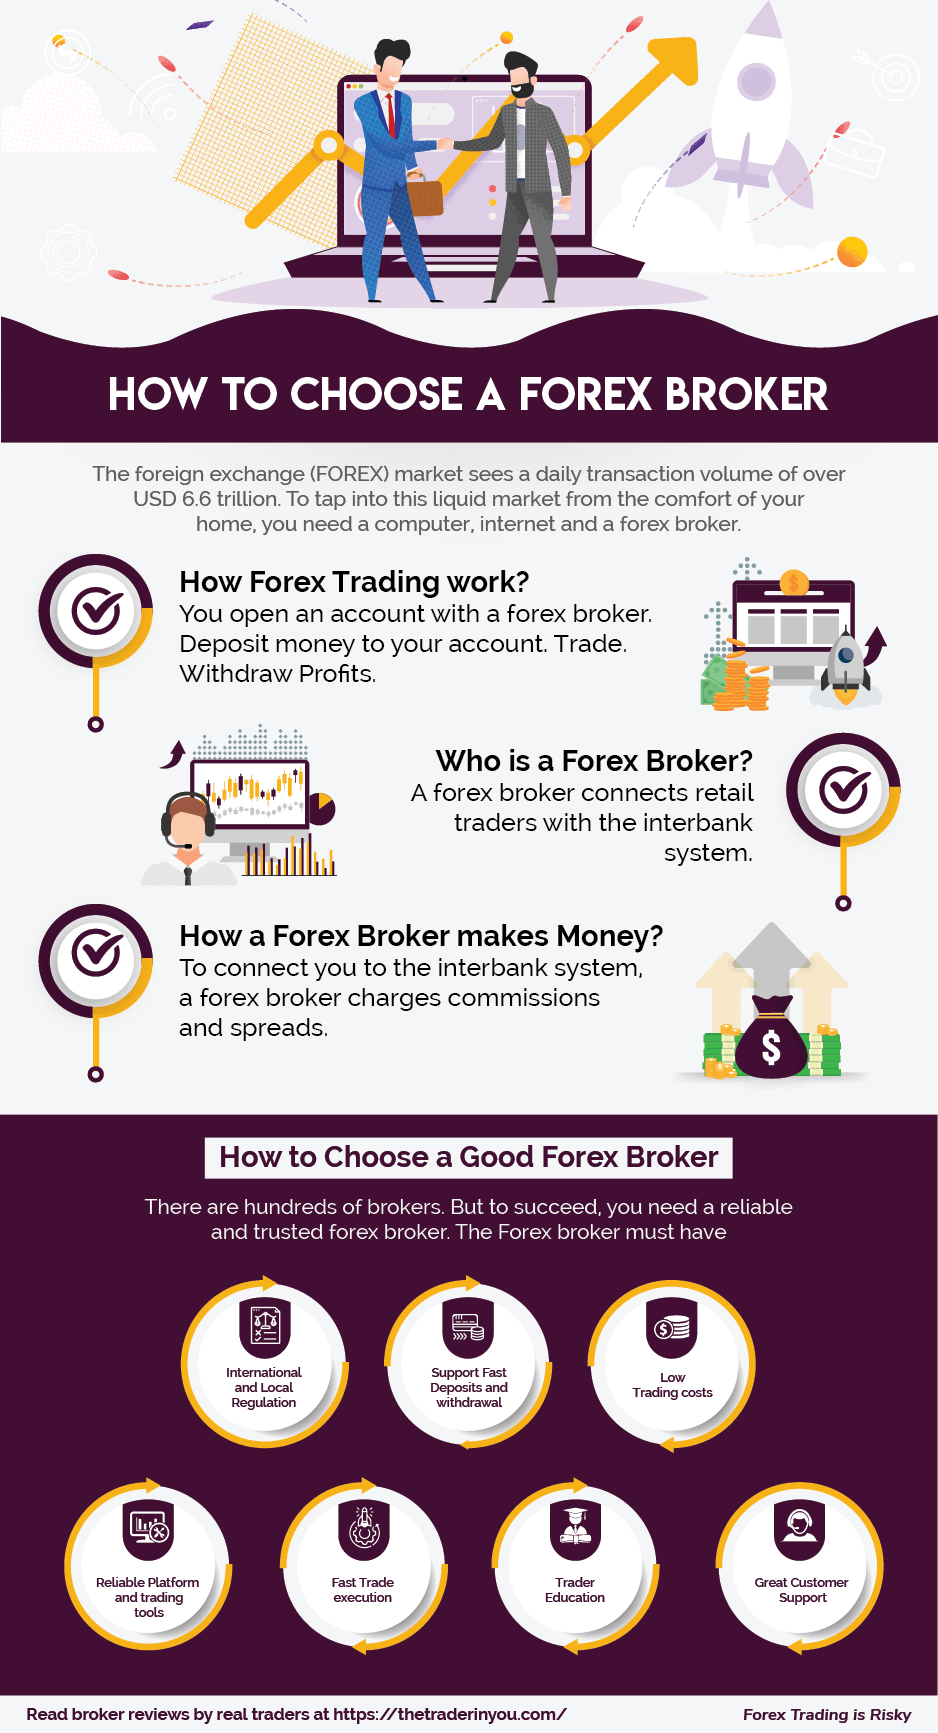 How To Choose A Forex Broker - 7 Things To Look For » The Trader In you